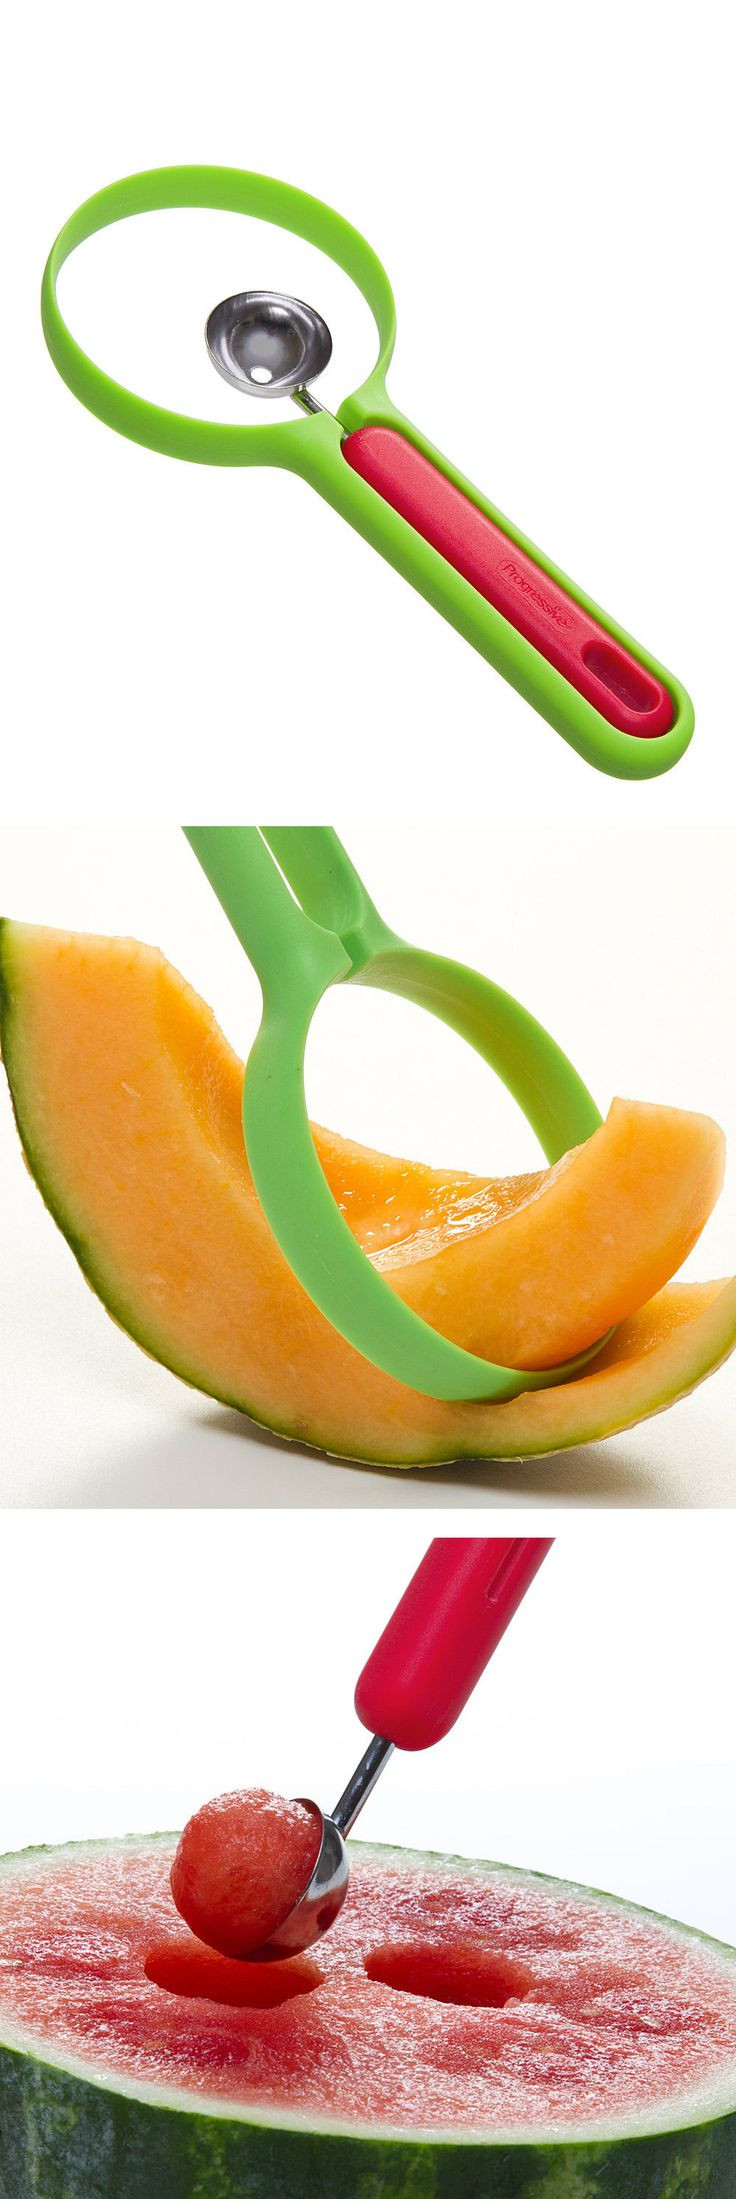 Two-In-One melon slicer / scooper